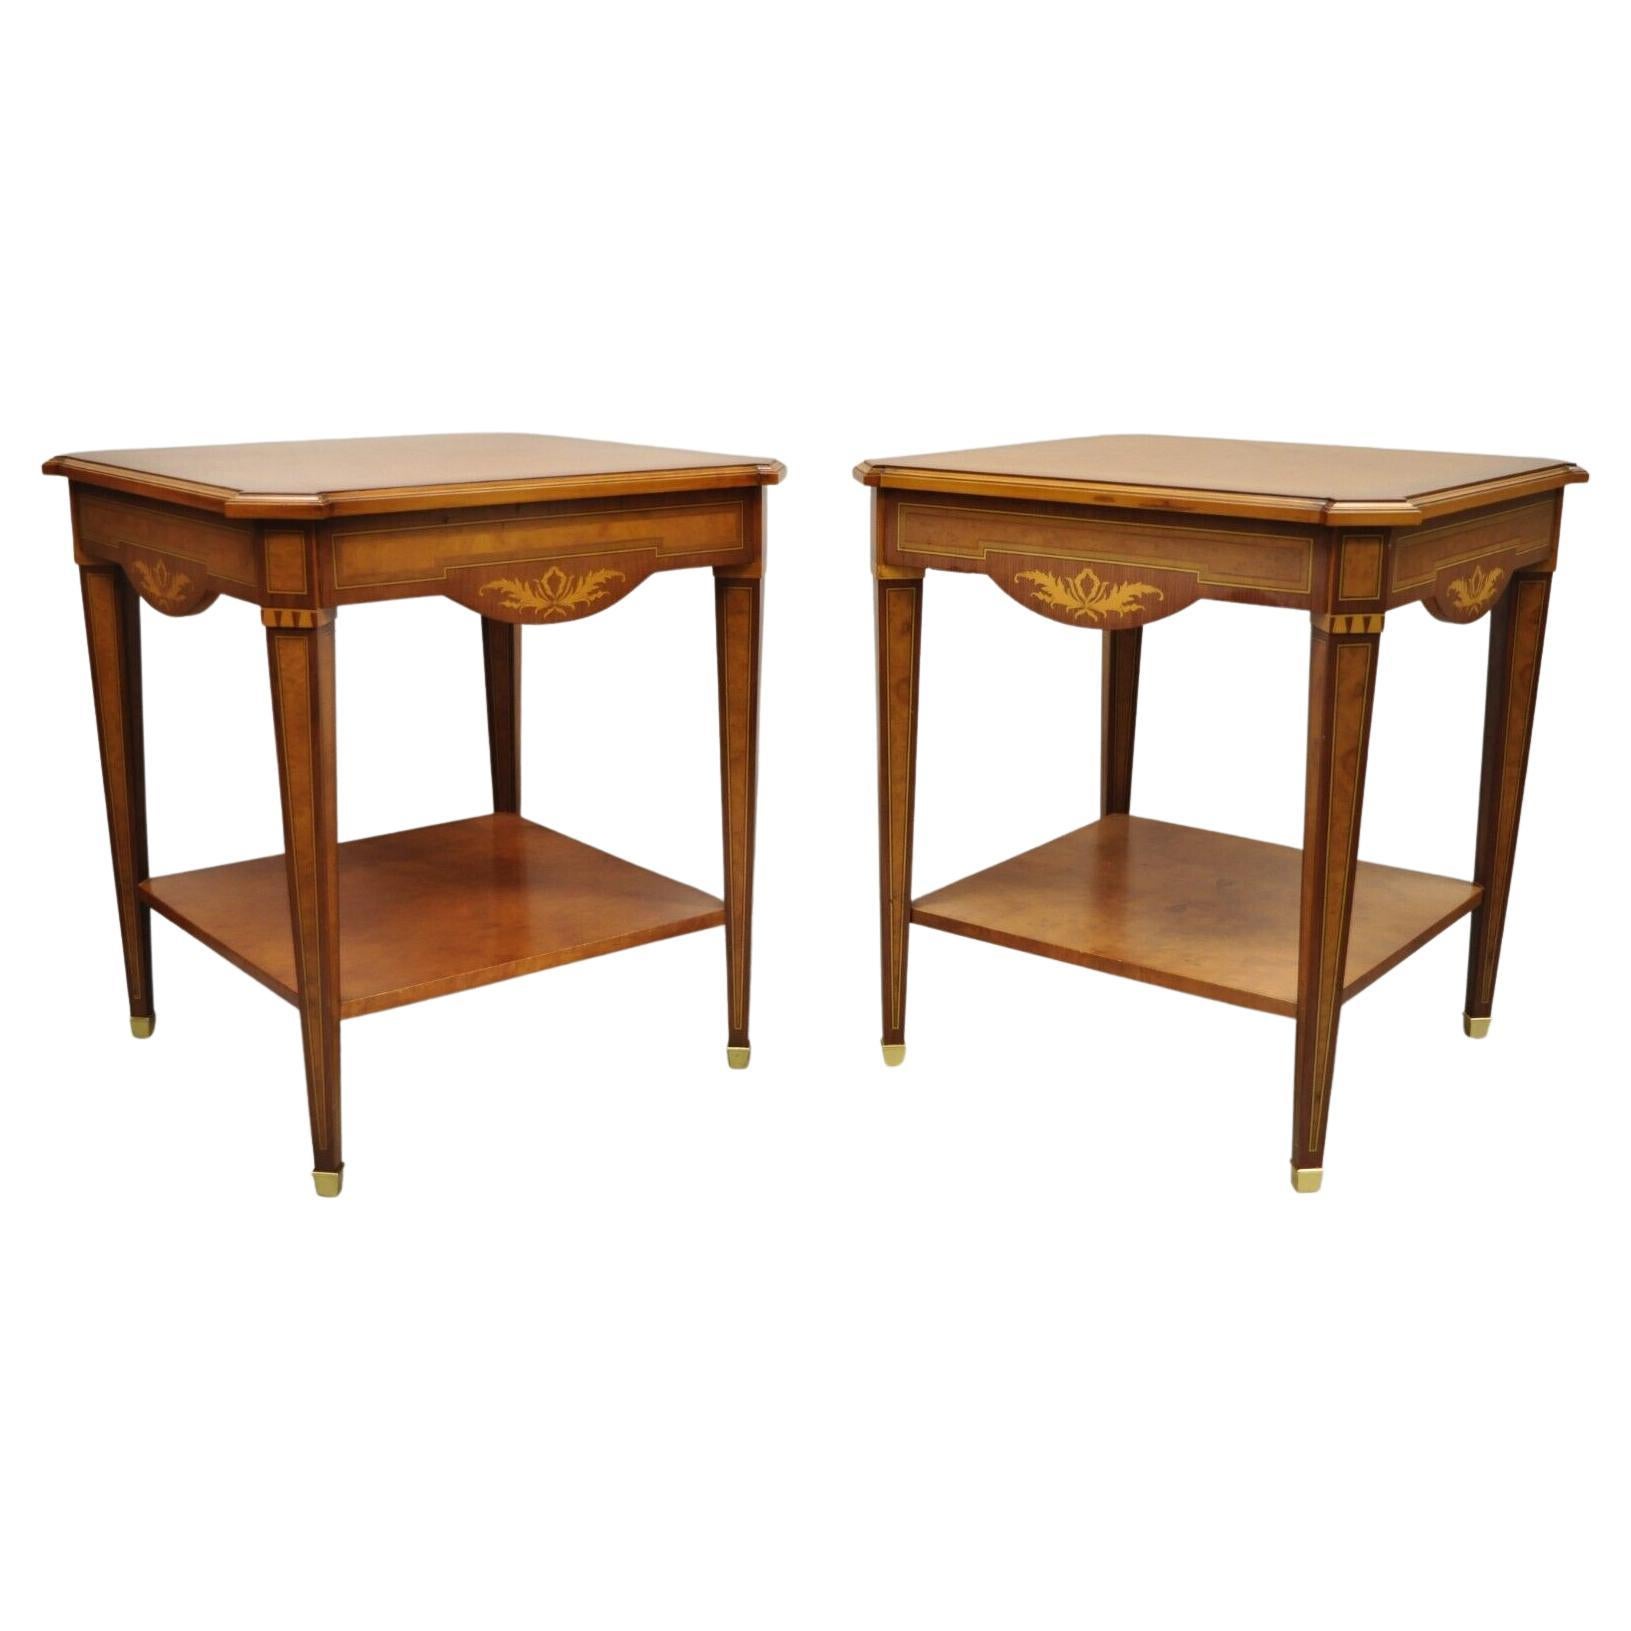 French Louis XVI Style Satinwood Inlay Side End Tables by Mudeva - a Pair       